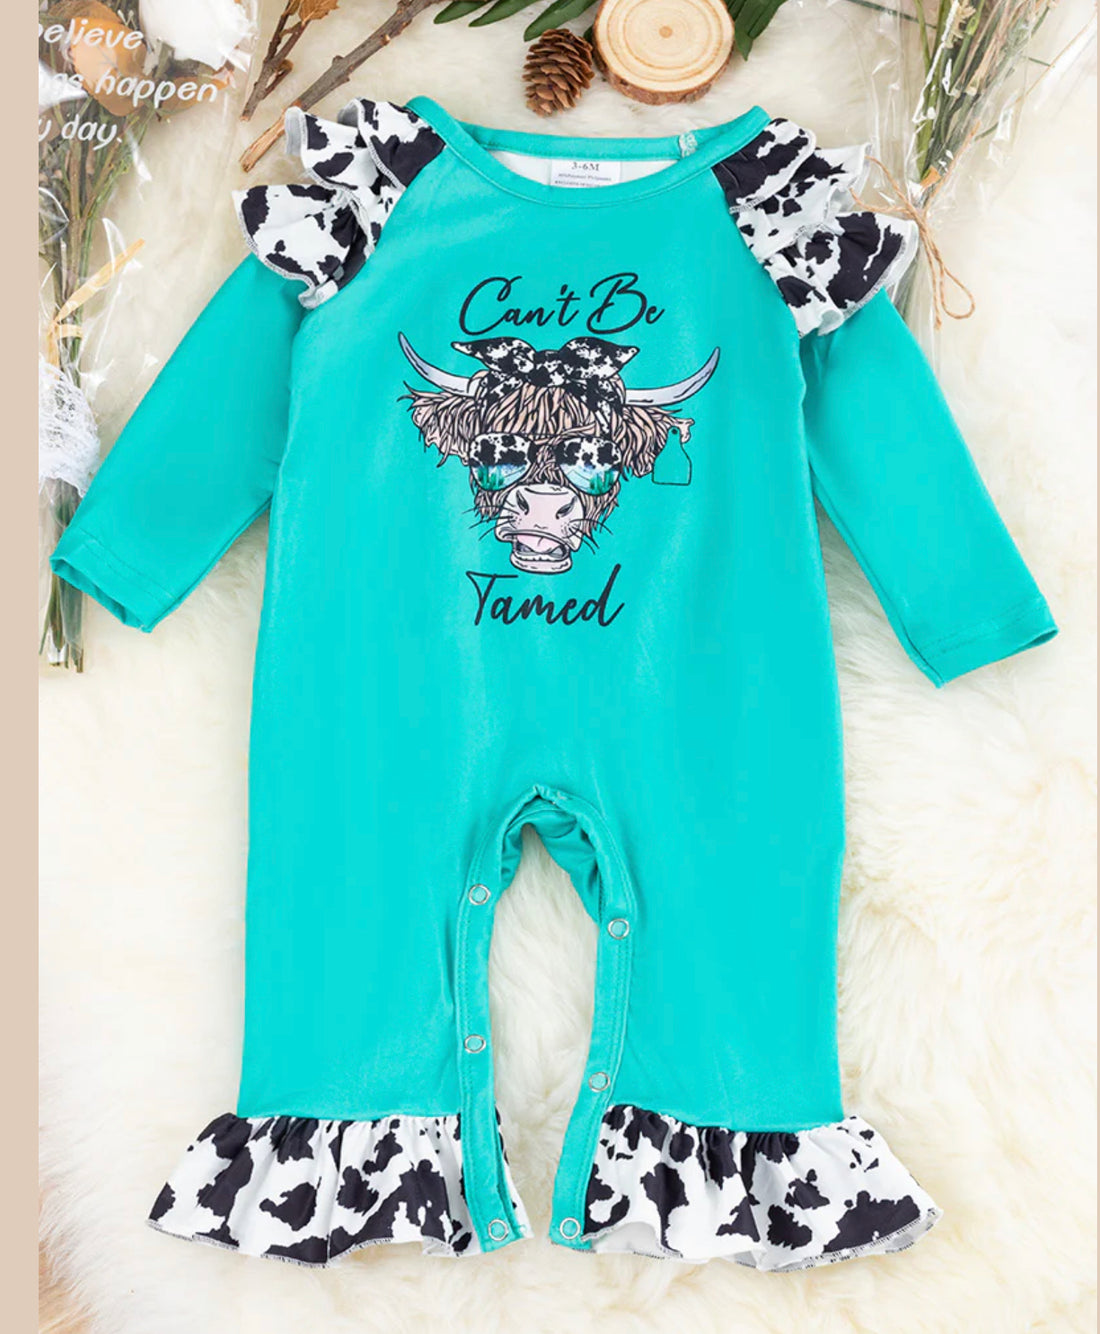 ‘’Can’t Be Tamed” Cow Print Baby Romper with Ruffle Detail